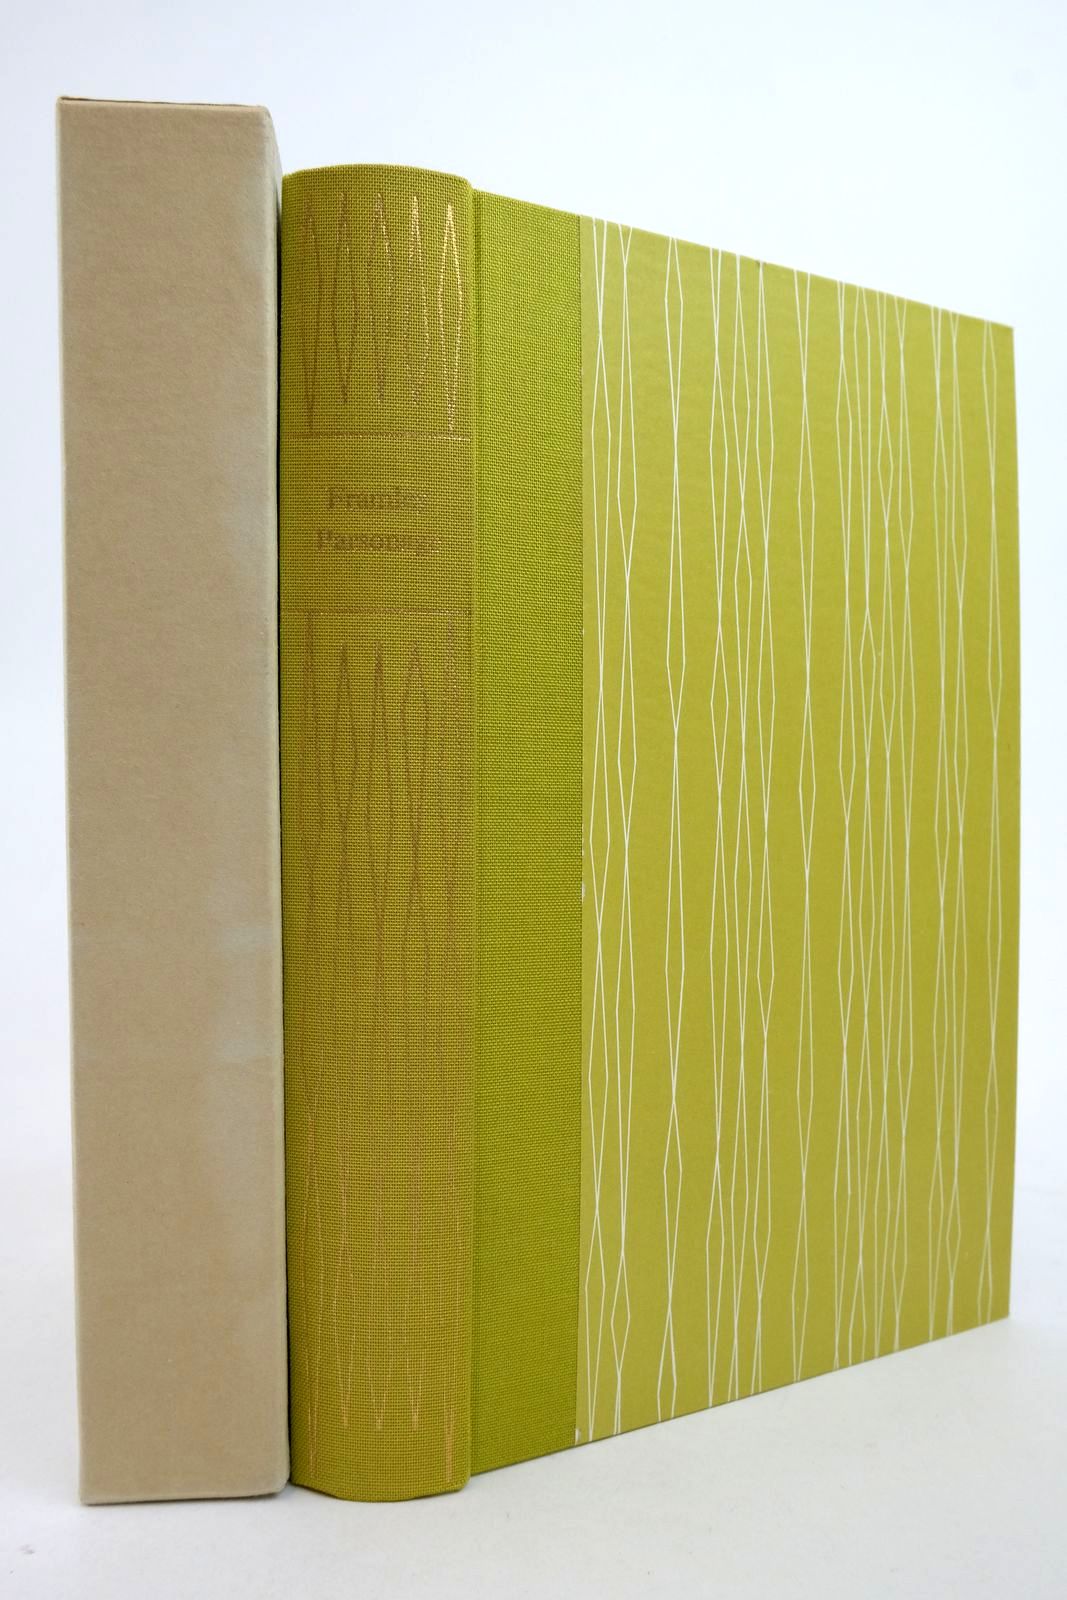 Photo of FRAMLEY PARSONAGE written by Trollope, Anthony illustrated by Reddick, Peter published by Folio Society (STOCK CODE: 2138353)  for sale by Stella & Rose's Books